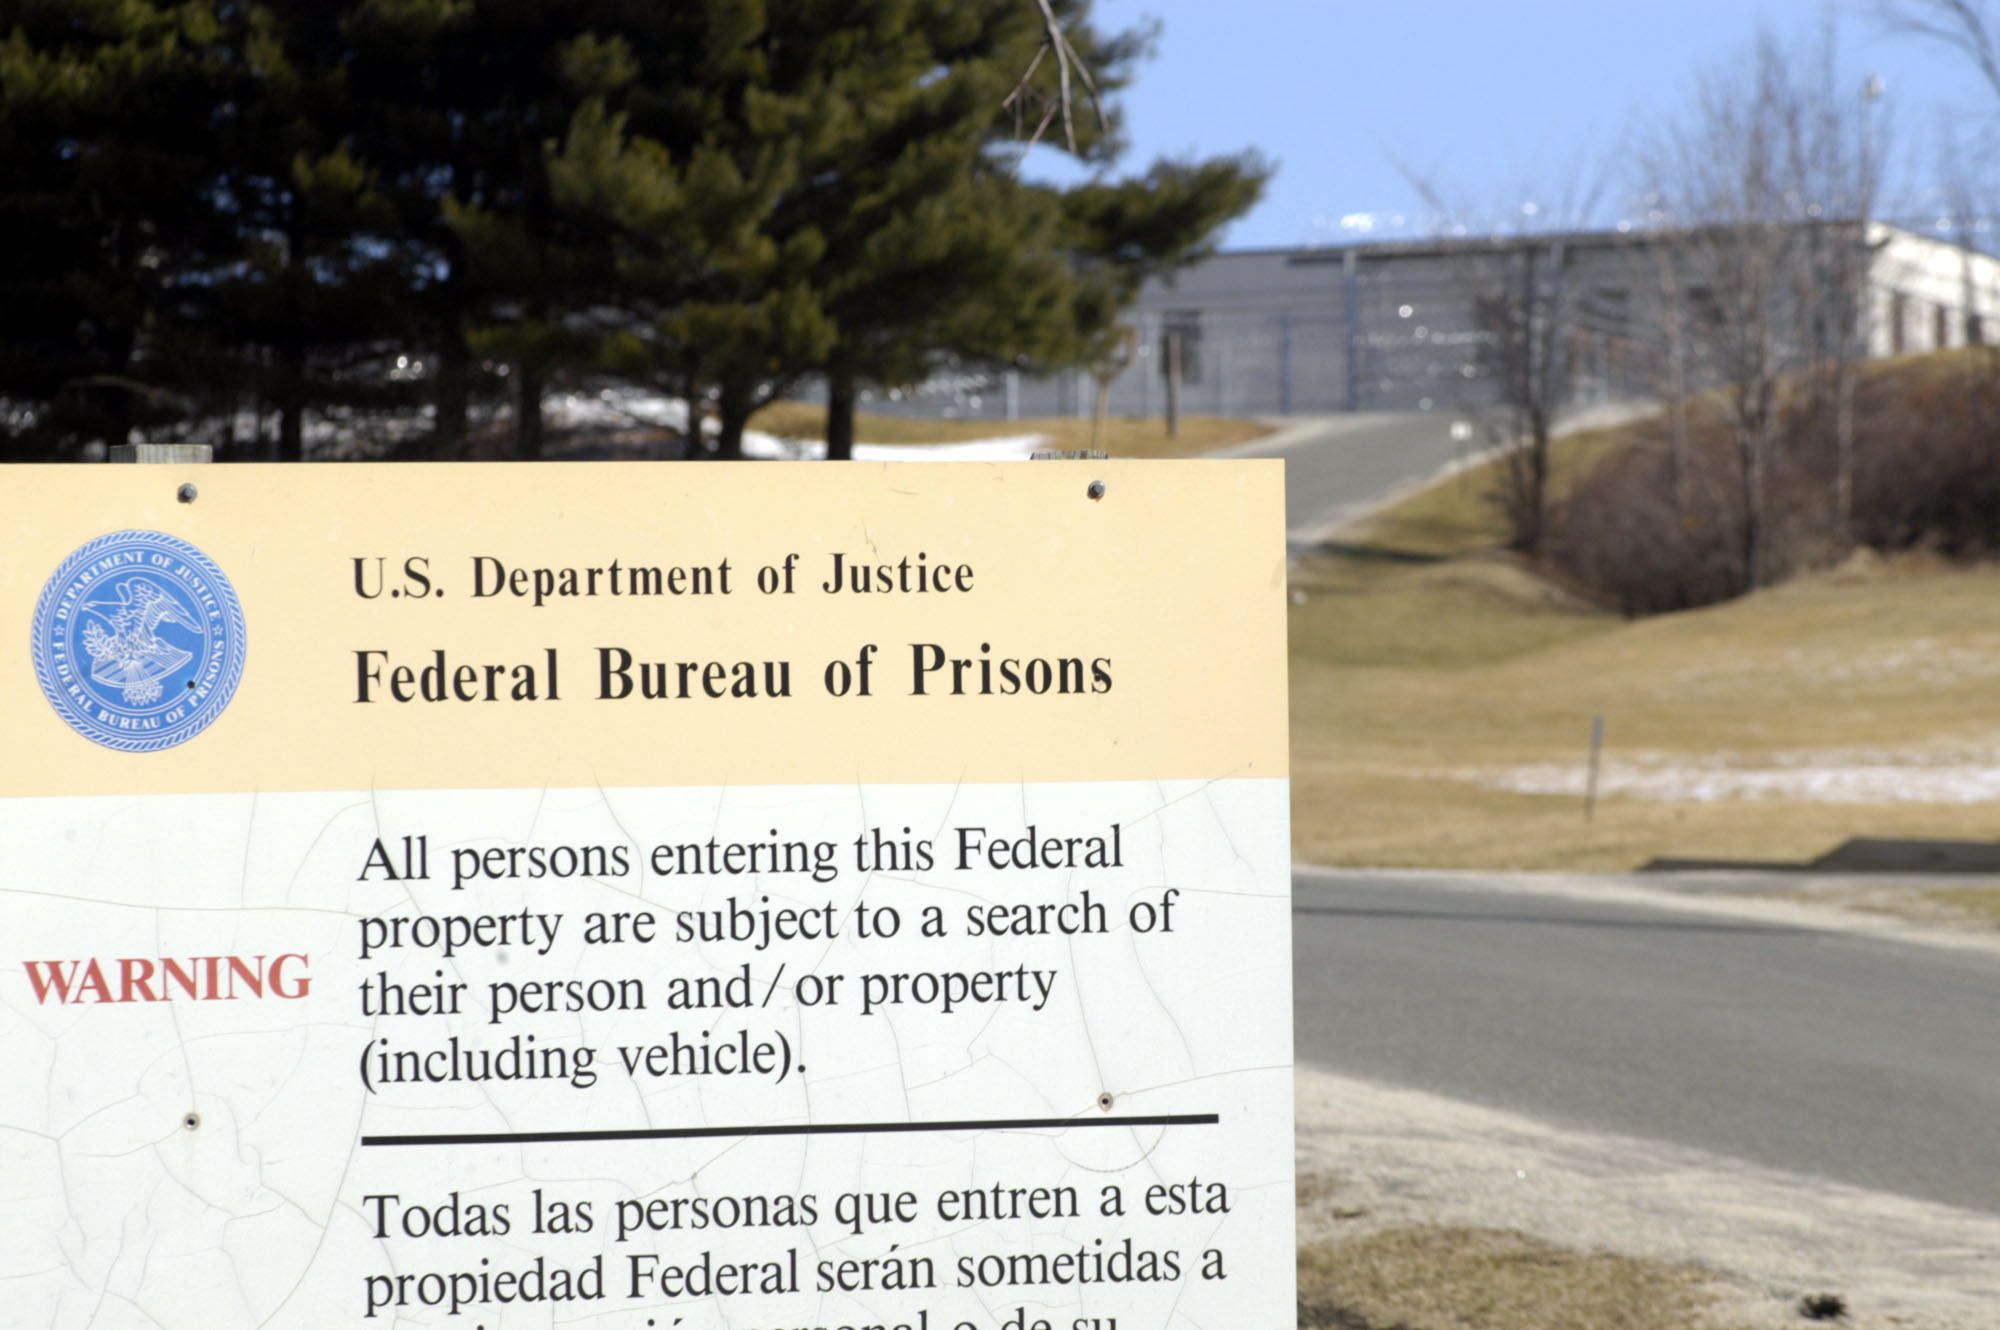 UNITED STATES - MARCH 11:  The federal prison at Danbury, Connecticut is pictured on Thursday, March 11, 2004. Martha Stewart, convicted of obstructing a U.S. investigation of stock she sold, may serve her 10-to-16 month sentence at the facility, about 27 miles form her home in Westport, Connecticut.  (Photo by Chris Ware/Bloomberg via Getty Images) (Bloomberg&mdash;Bloomberg via Getty Images)